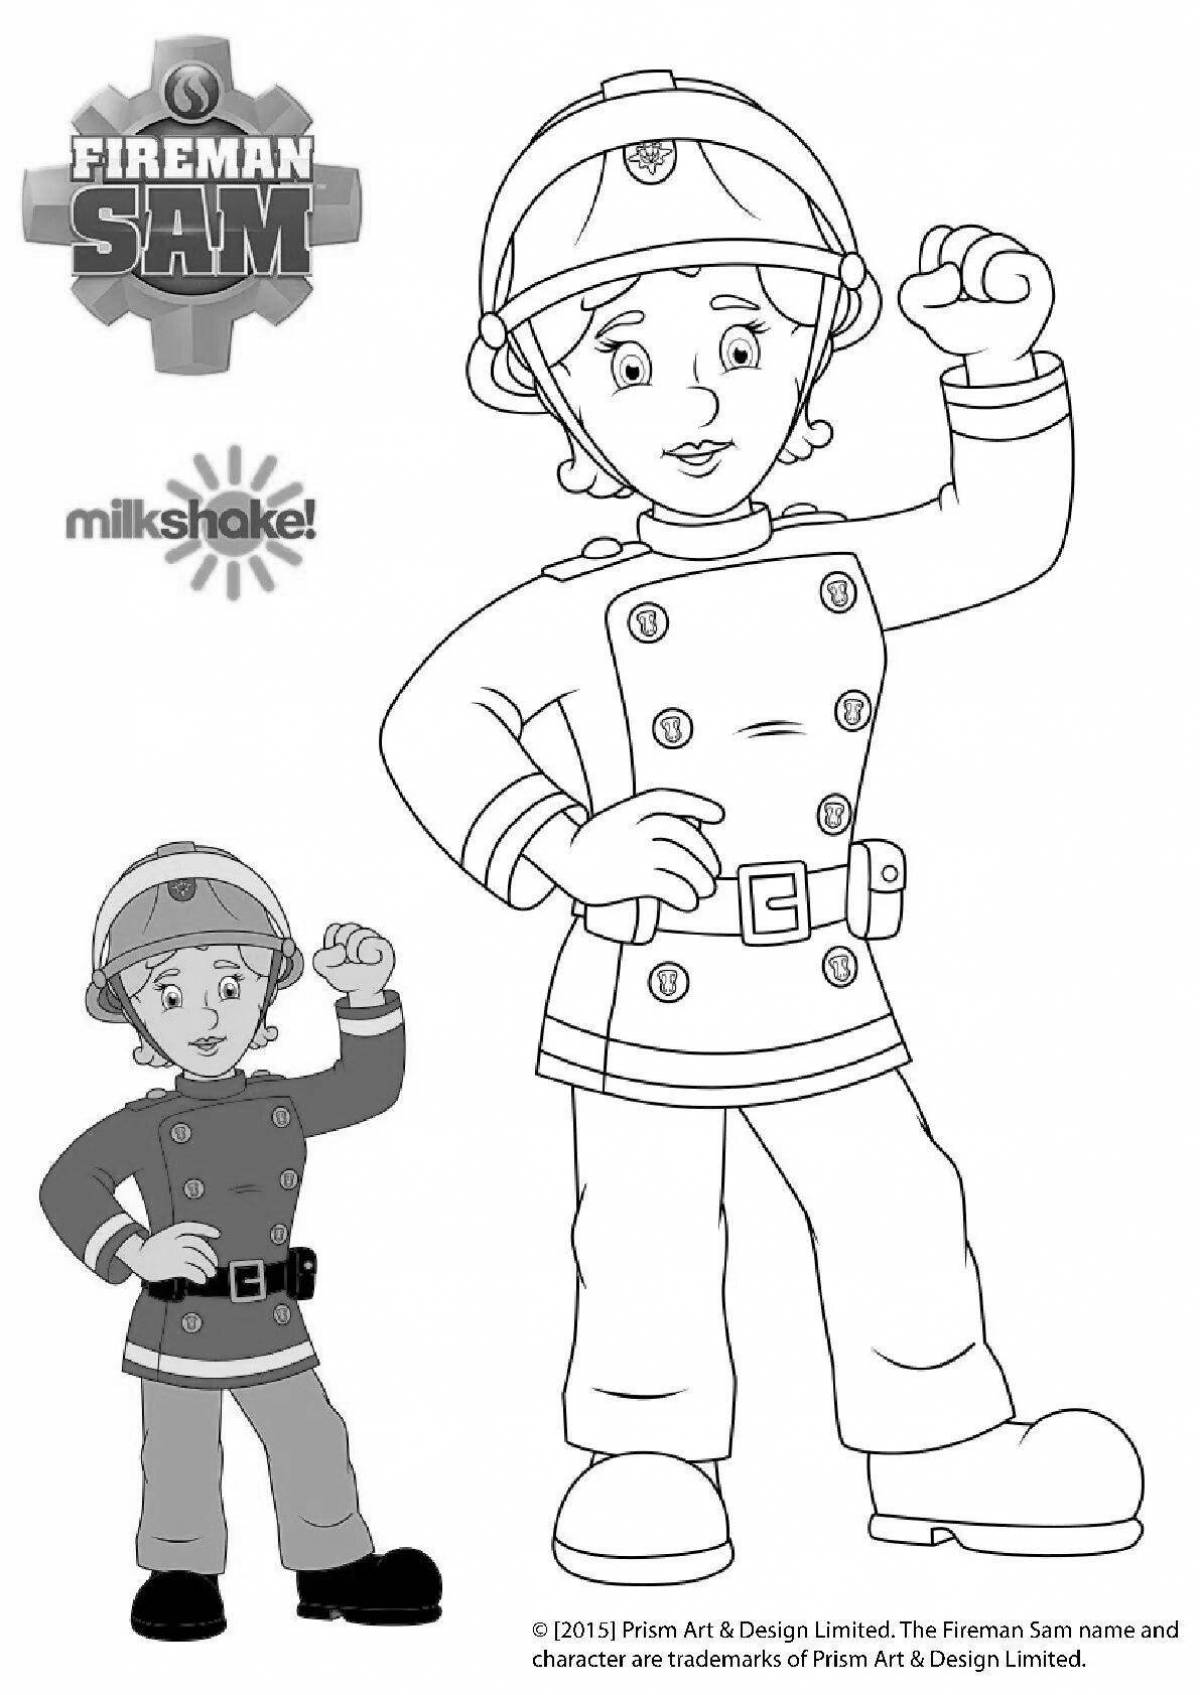 Amazing fireman sam coloring book for kids